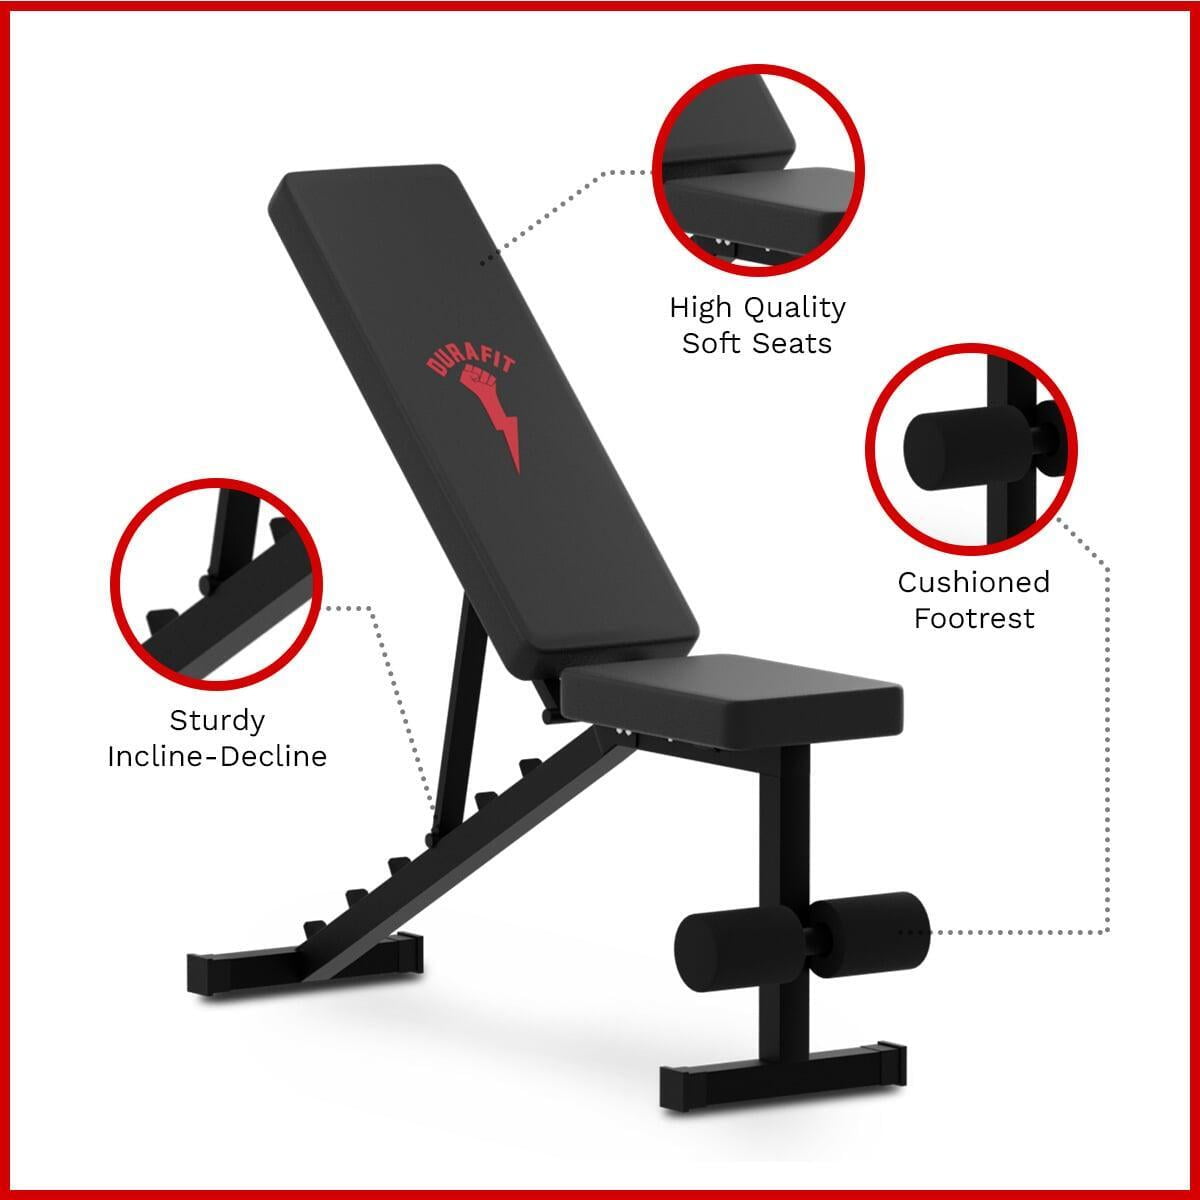 Durafit Foldable Bench FB01 with smooth and comfortable